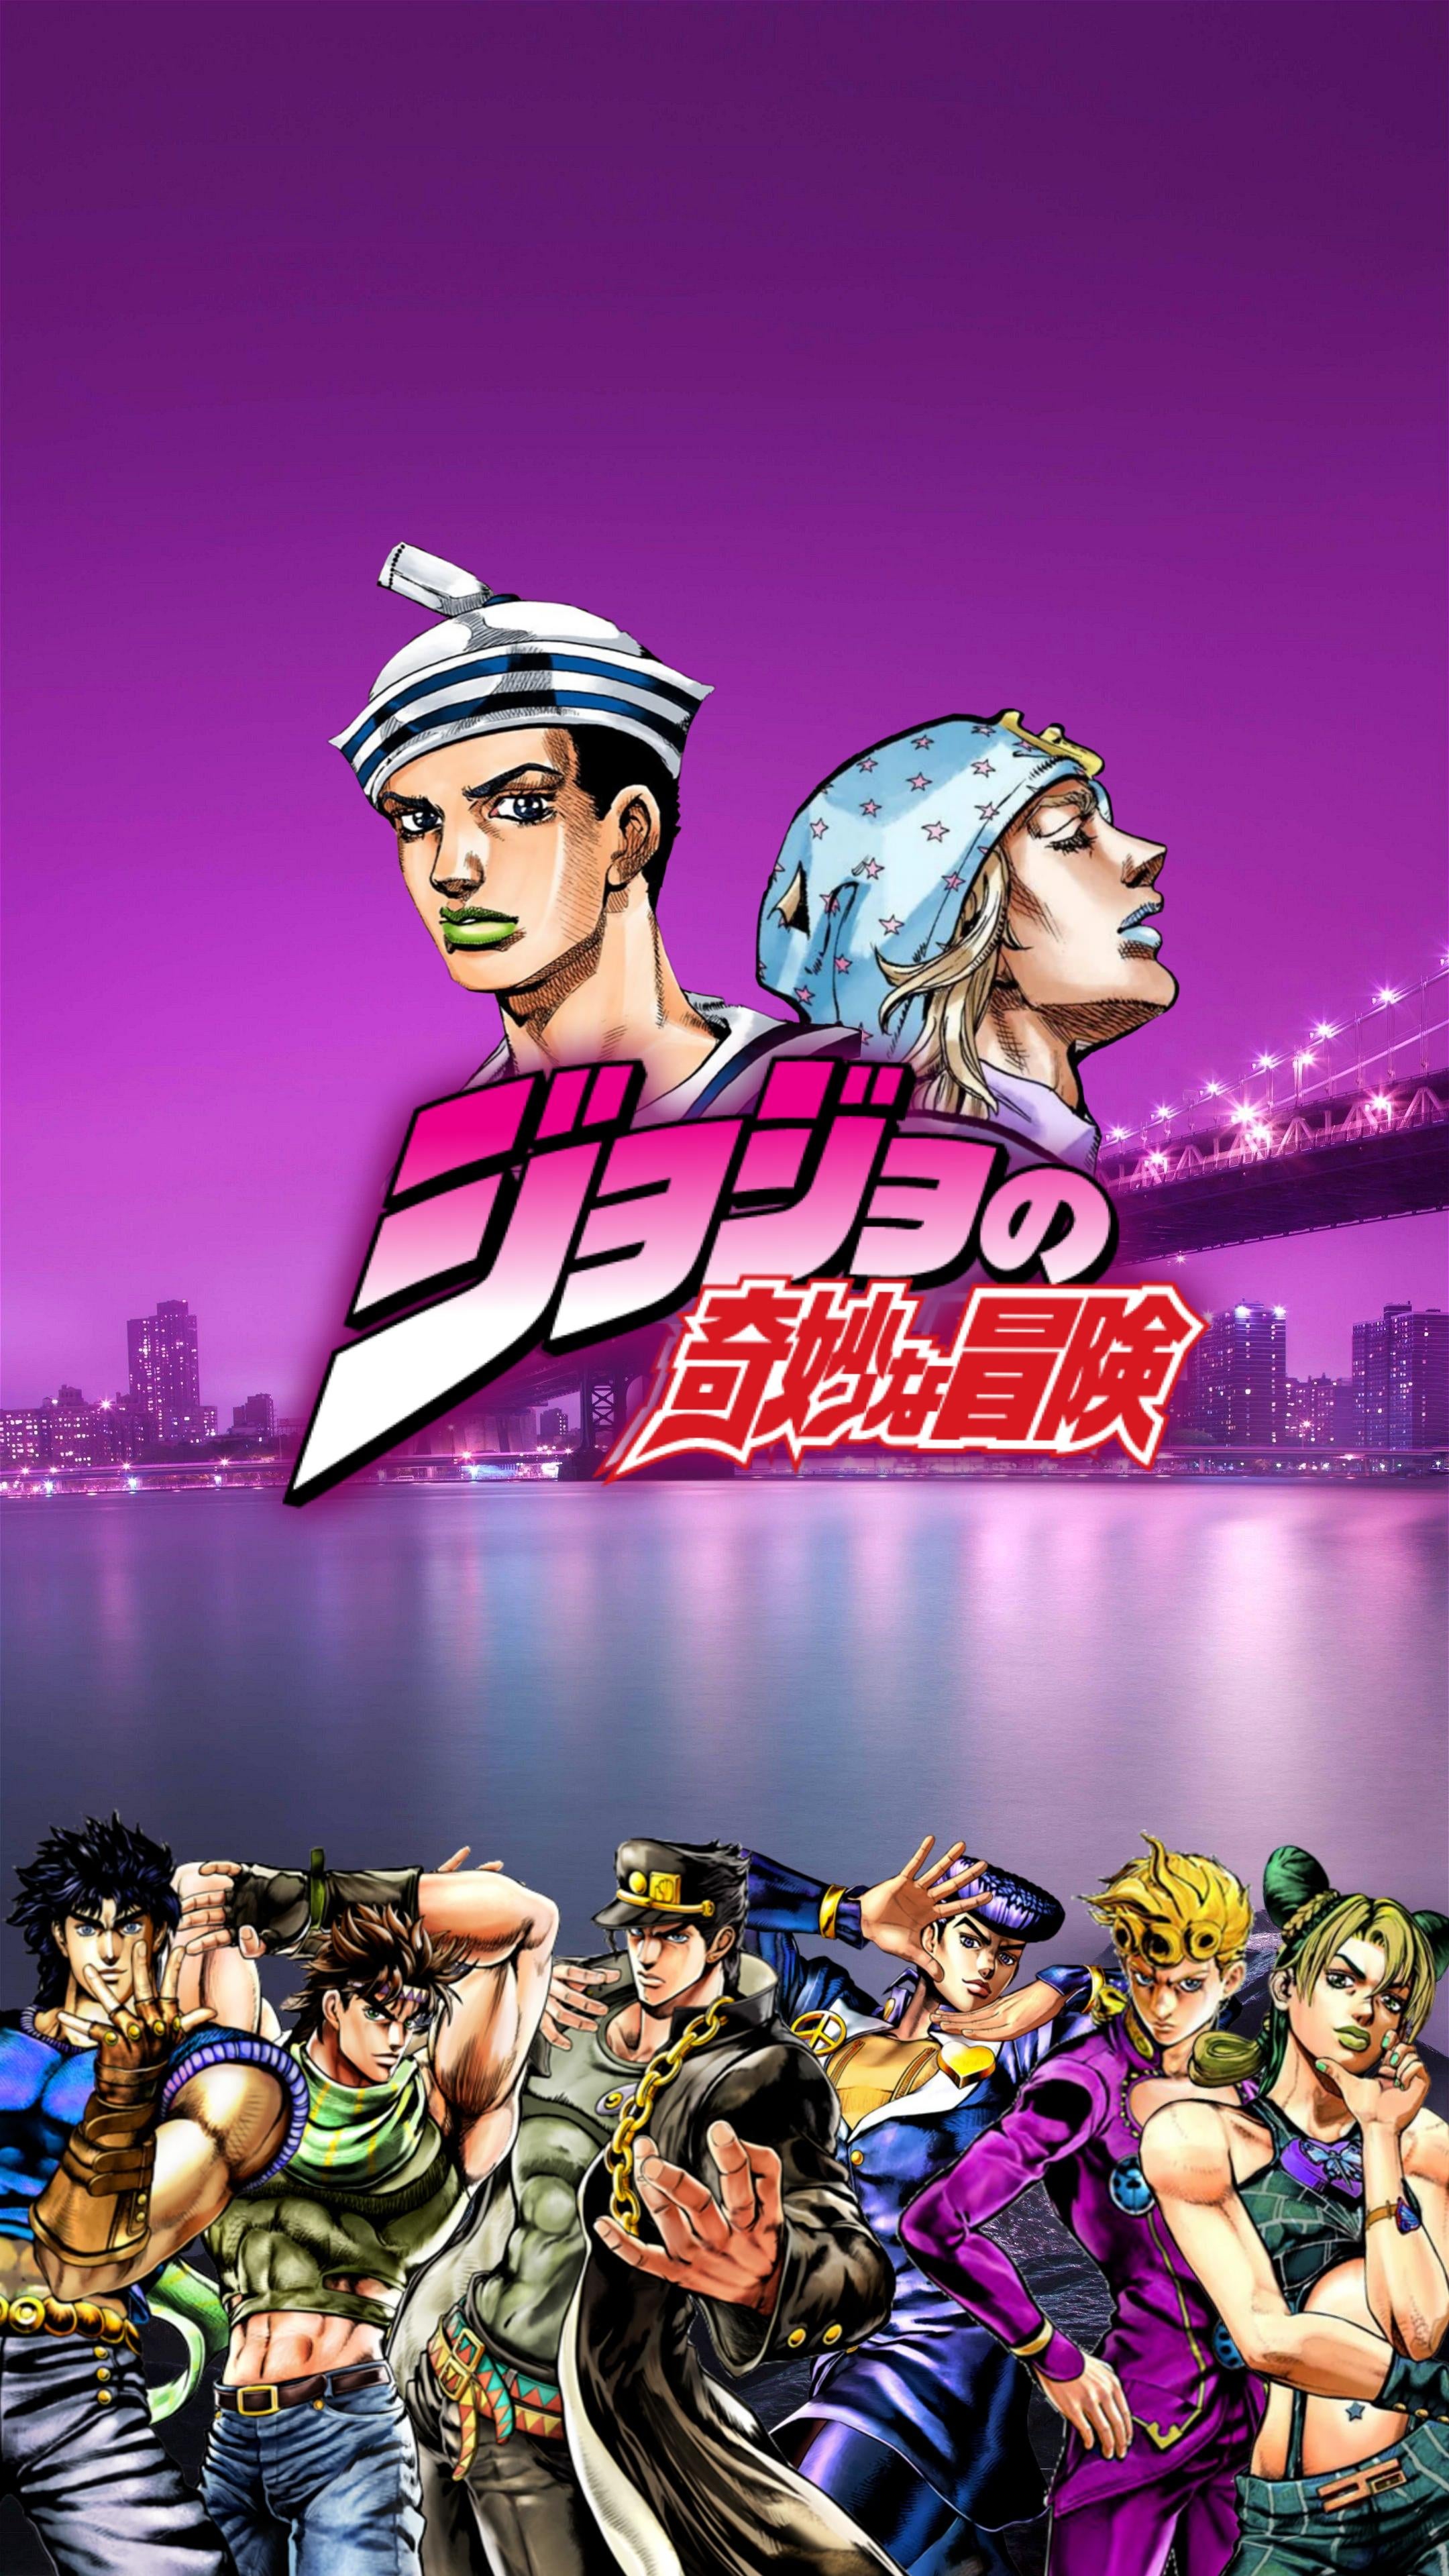 JoJo phone wallpaper I made, with different versions and aspect ratios :)